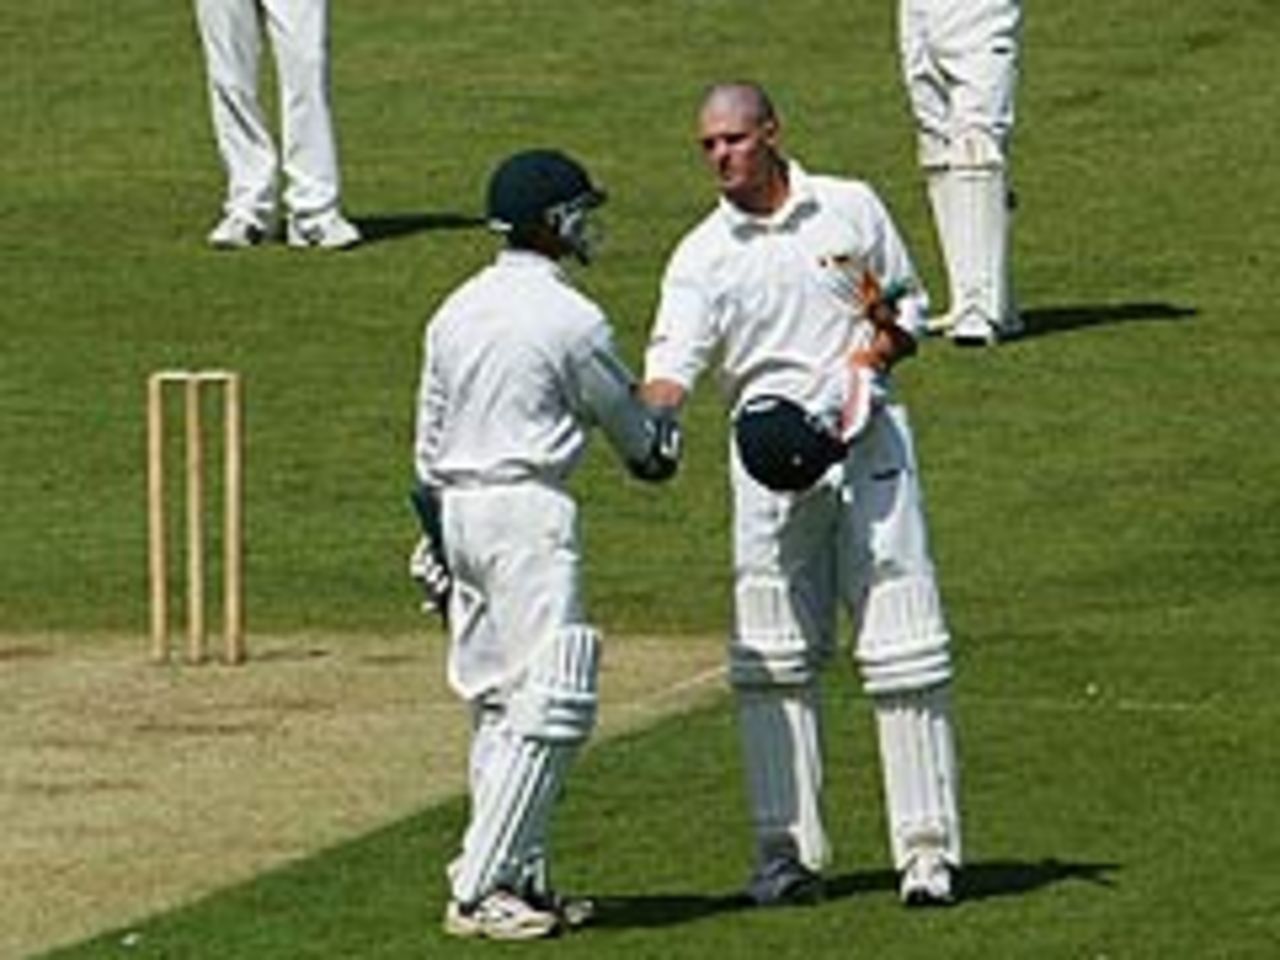 Mark Vermeulen is congratulated on reaching his hundred on the first day of Zimbabwe's tour match against Sussex at Hove (May 15 2003)